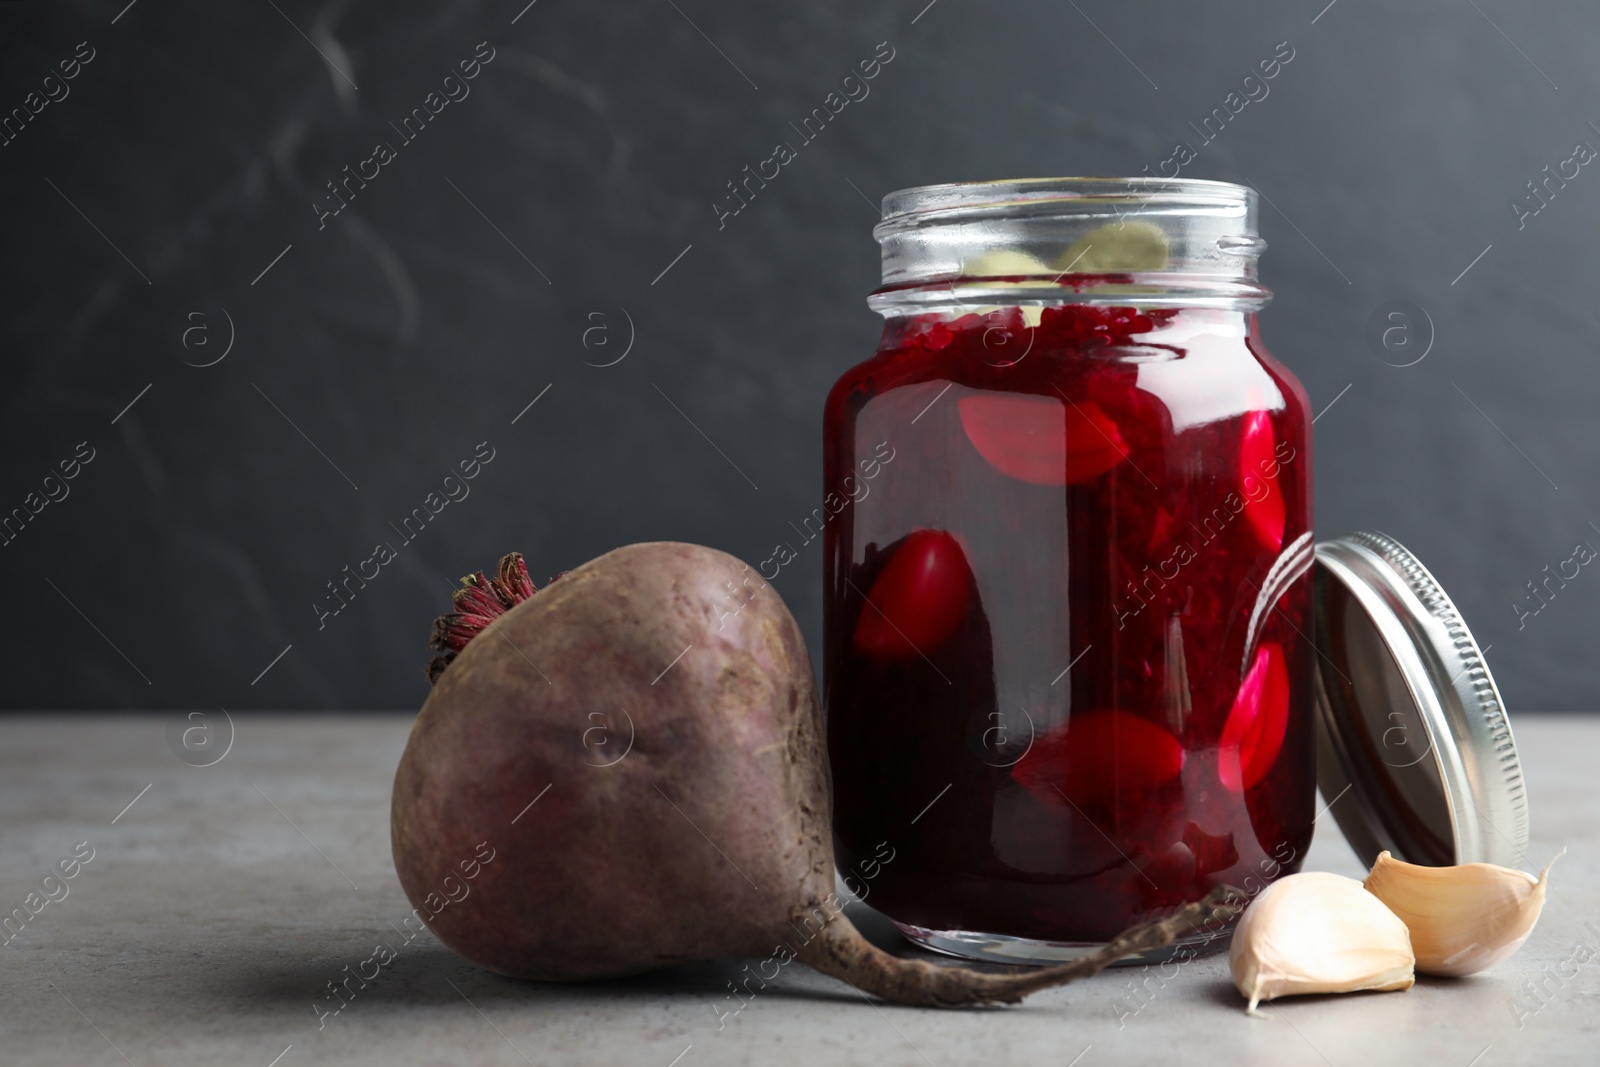 Photo of Pickled beets in glass jar on light table against dark background